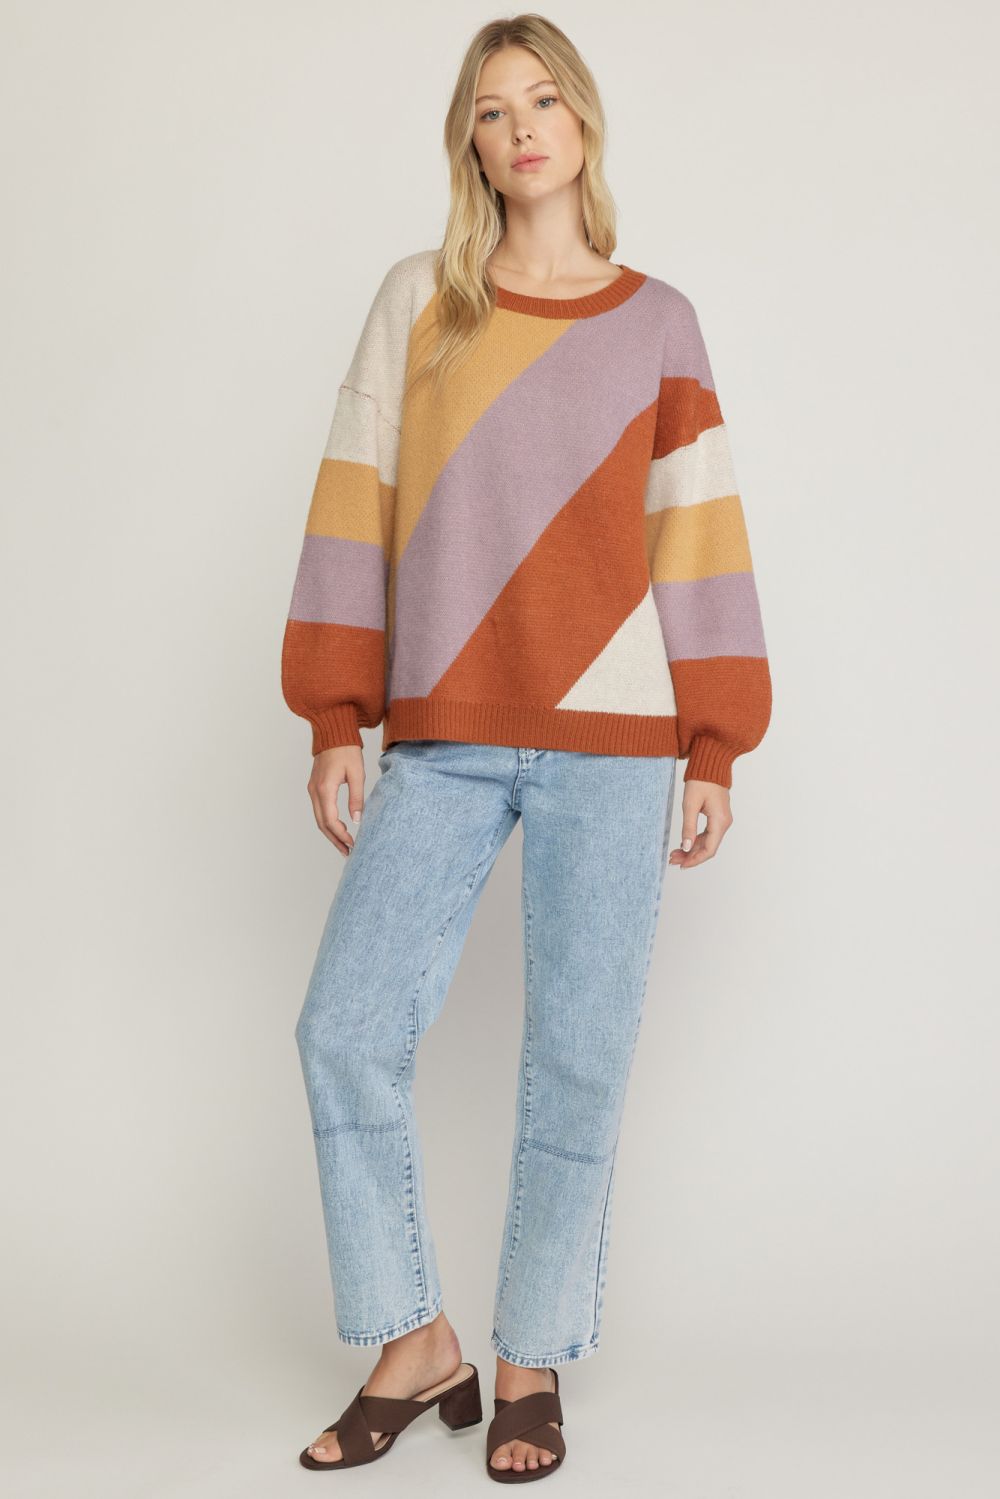 Better Than Words Colorblock Sweater